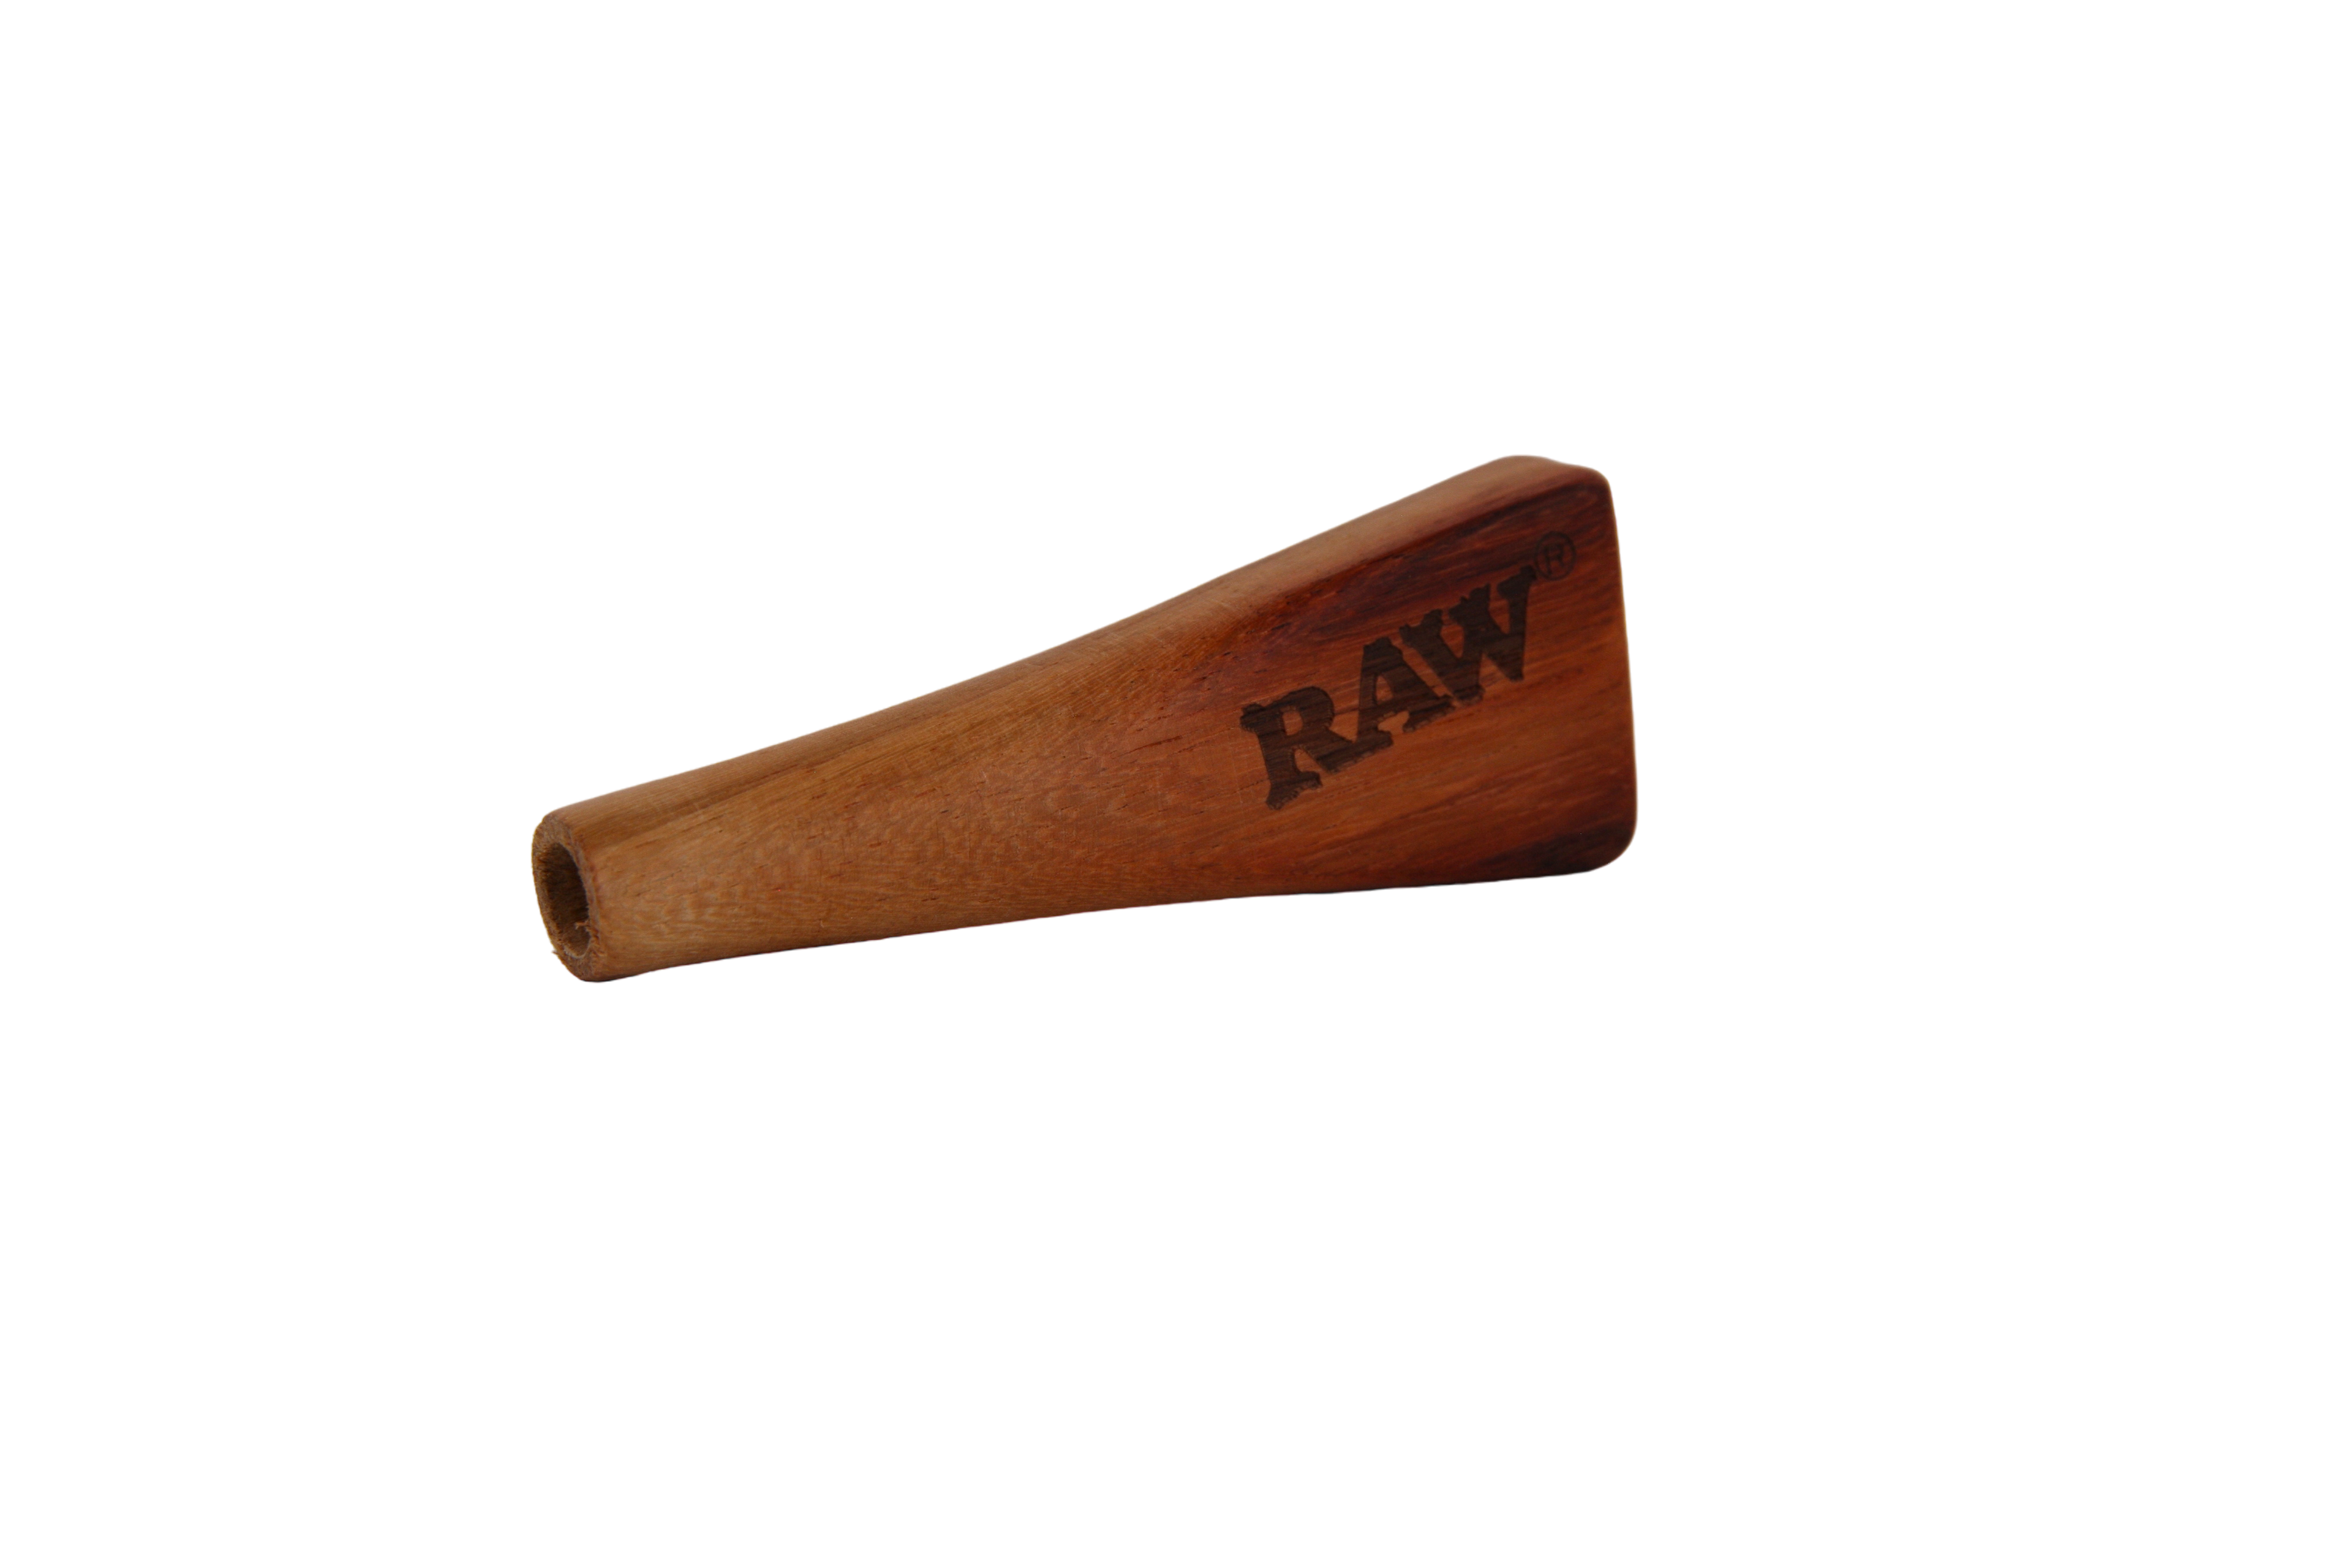 RAW Double Barrel Wooden Holder / King Size